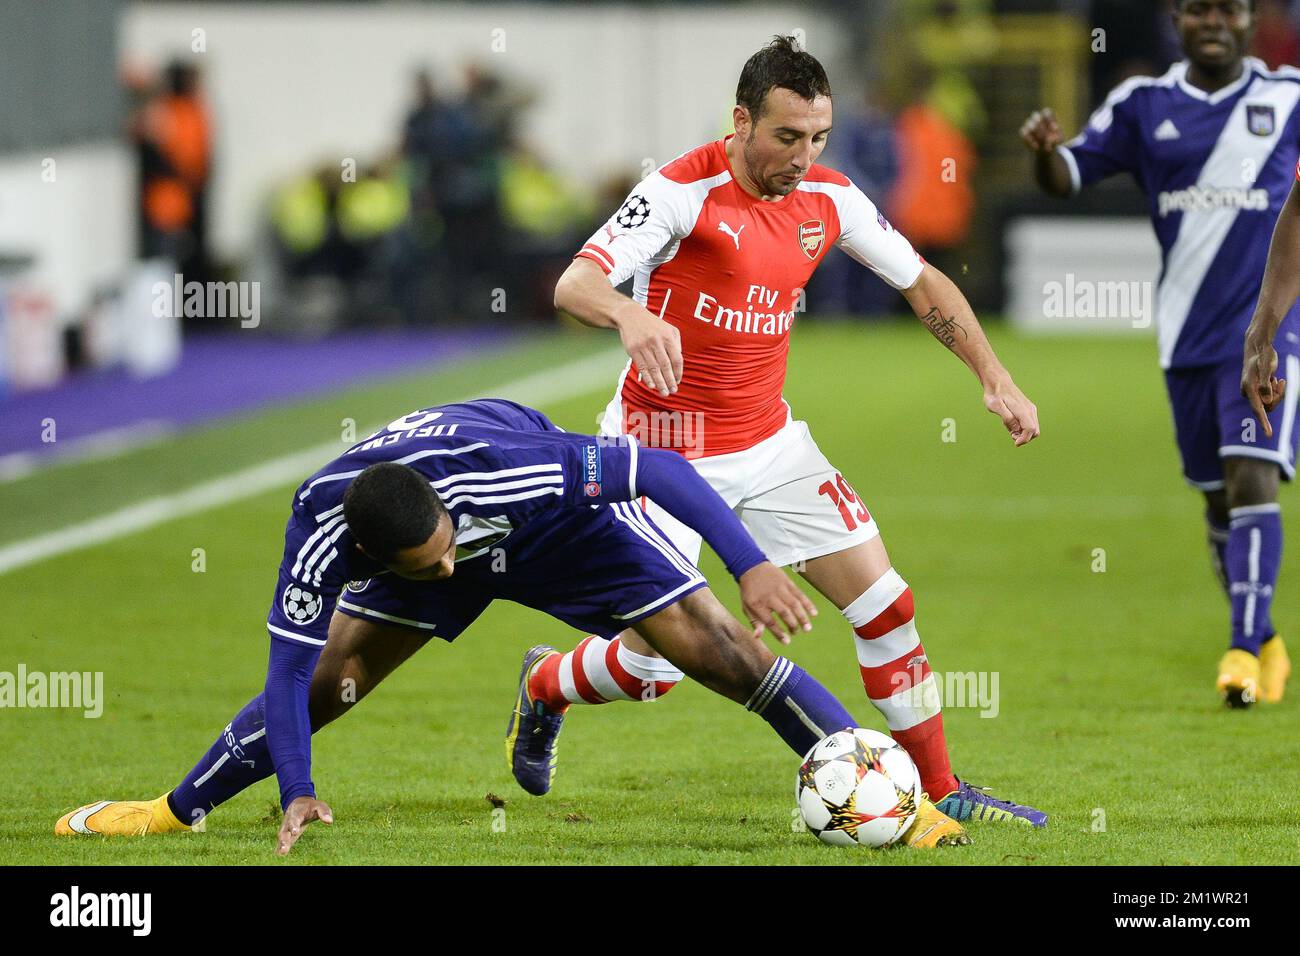 Anderlecht's Youri Tielemans and Arsenal's Santi Cazorla fight for the ball during a third group stage game between RSCA Anderlecht and English team Arsenal, in the group D of the UEFA Champions League competition, Wednesday 22 October 2014. BELGA PHOTO LAURIE DIEFFEMBACQ Stock Photo